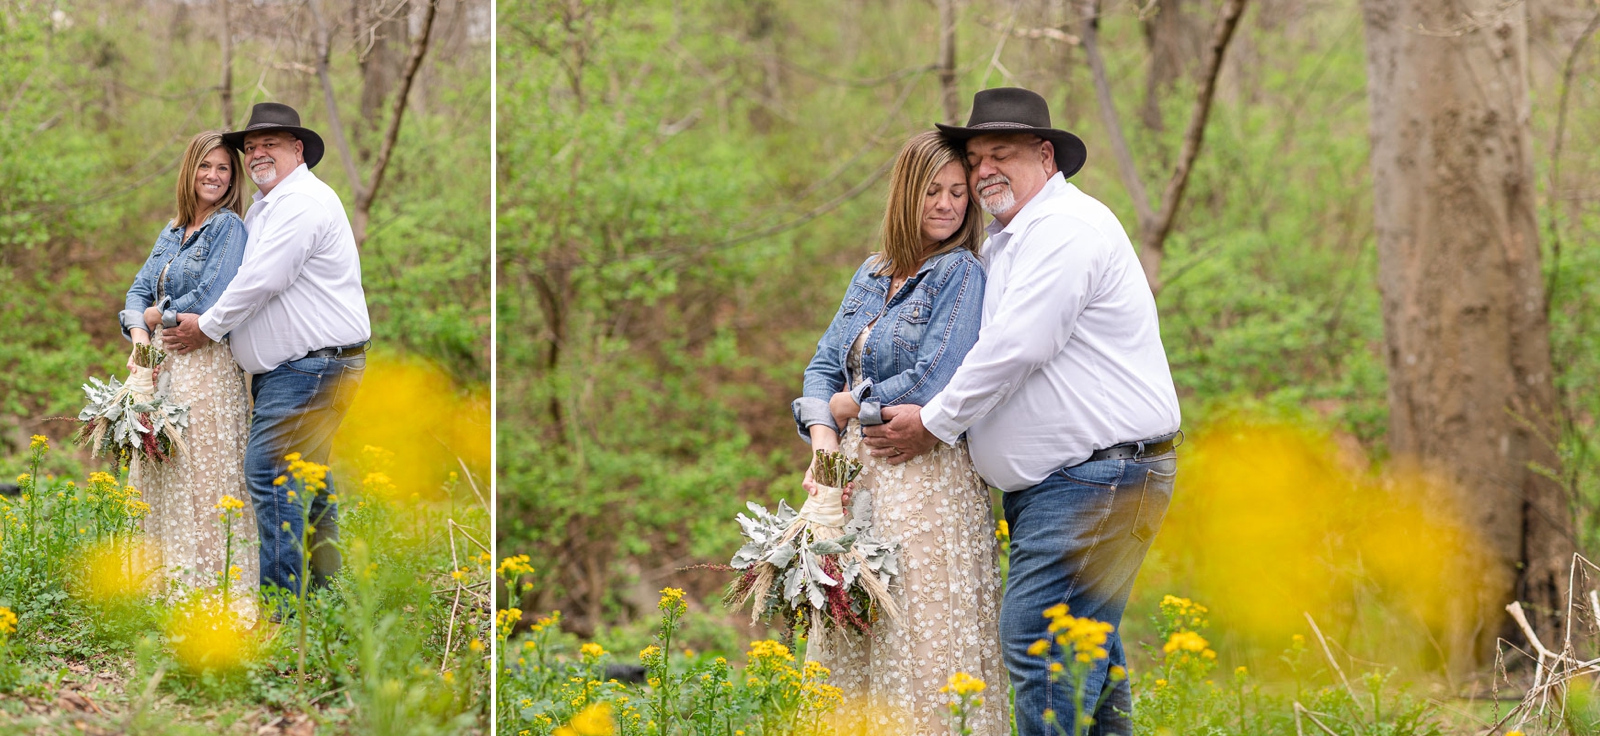 bride and groom in country setting with yellow wildflowers